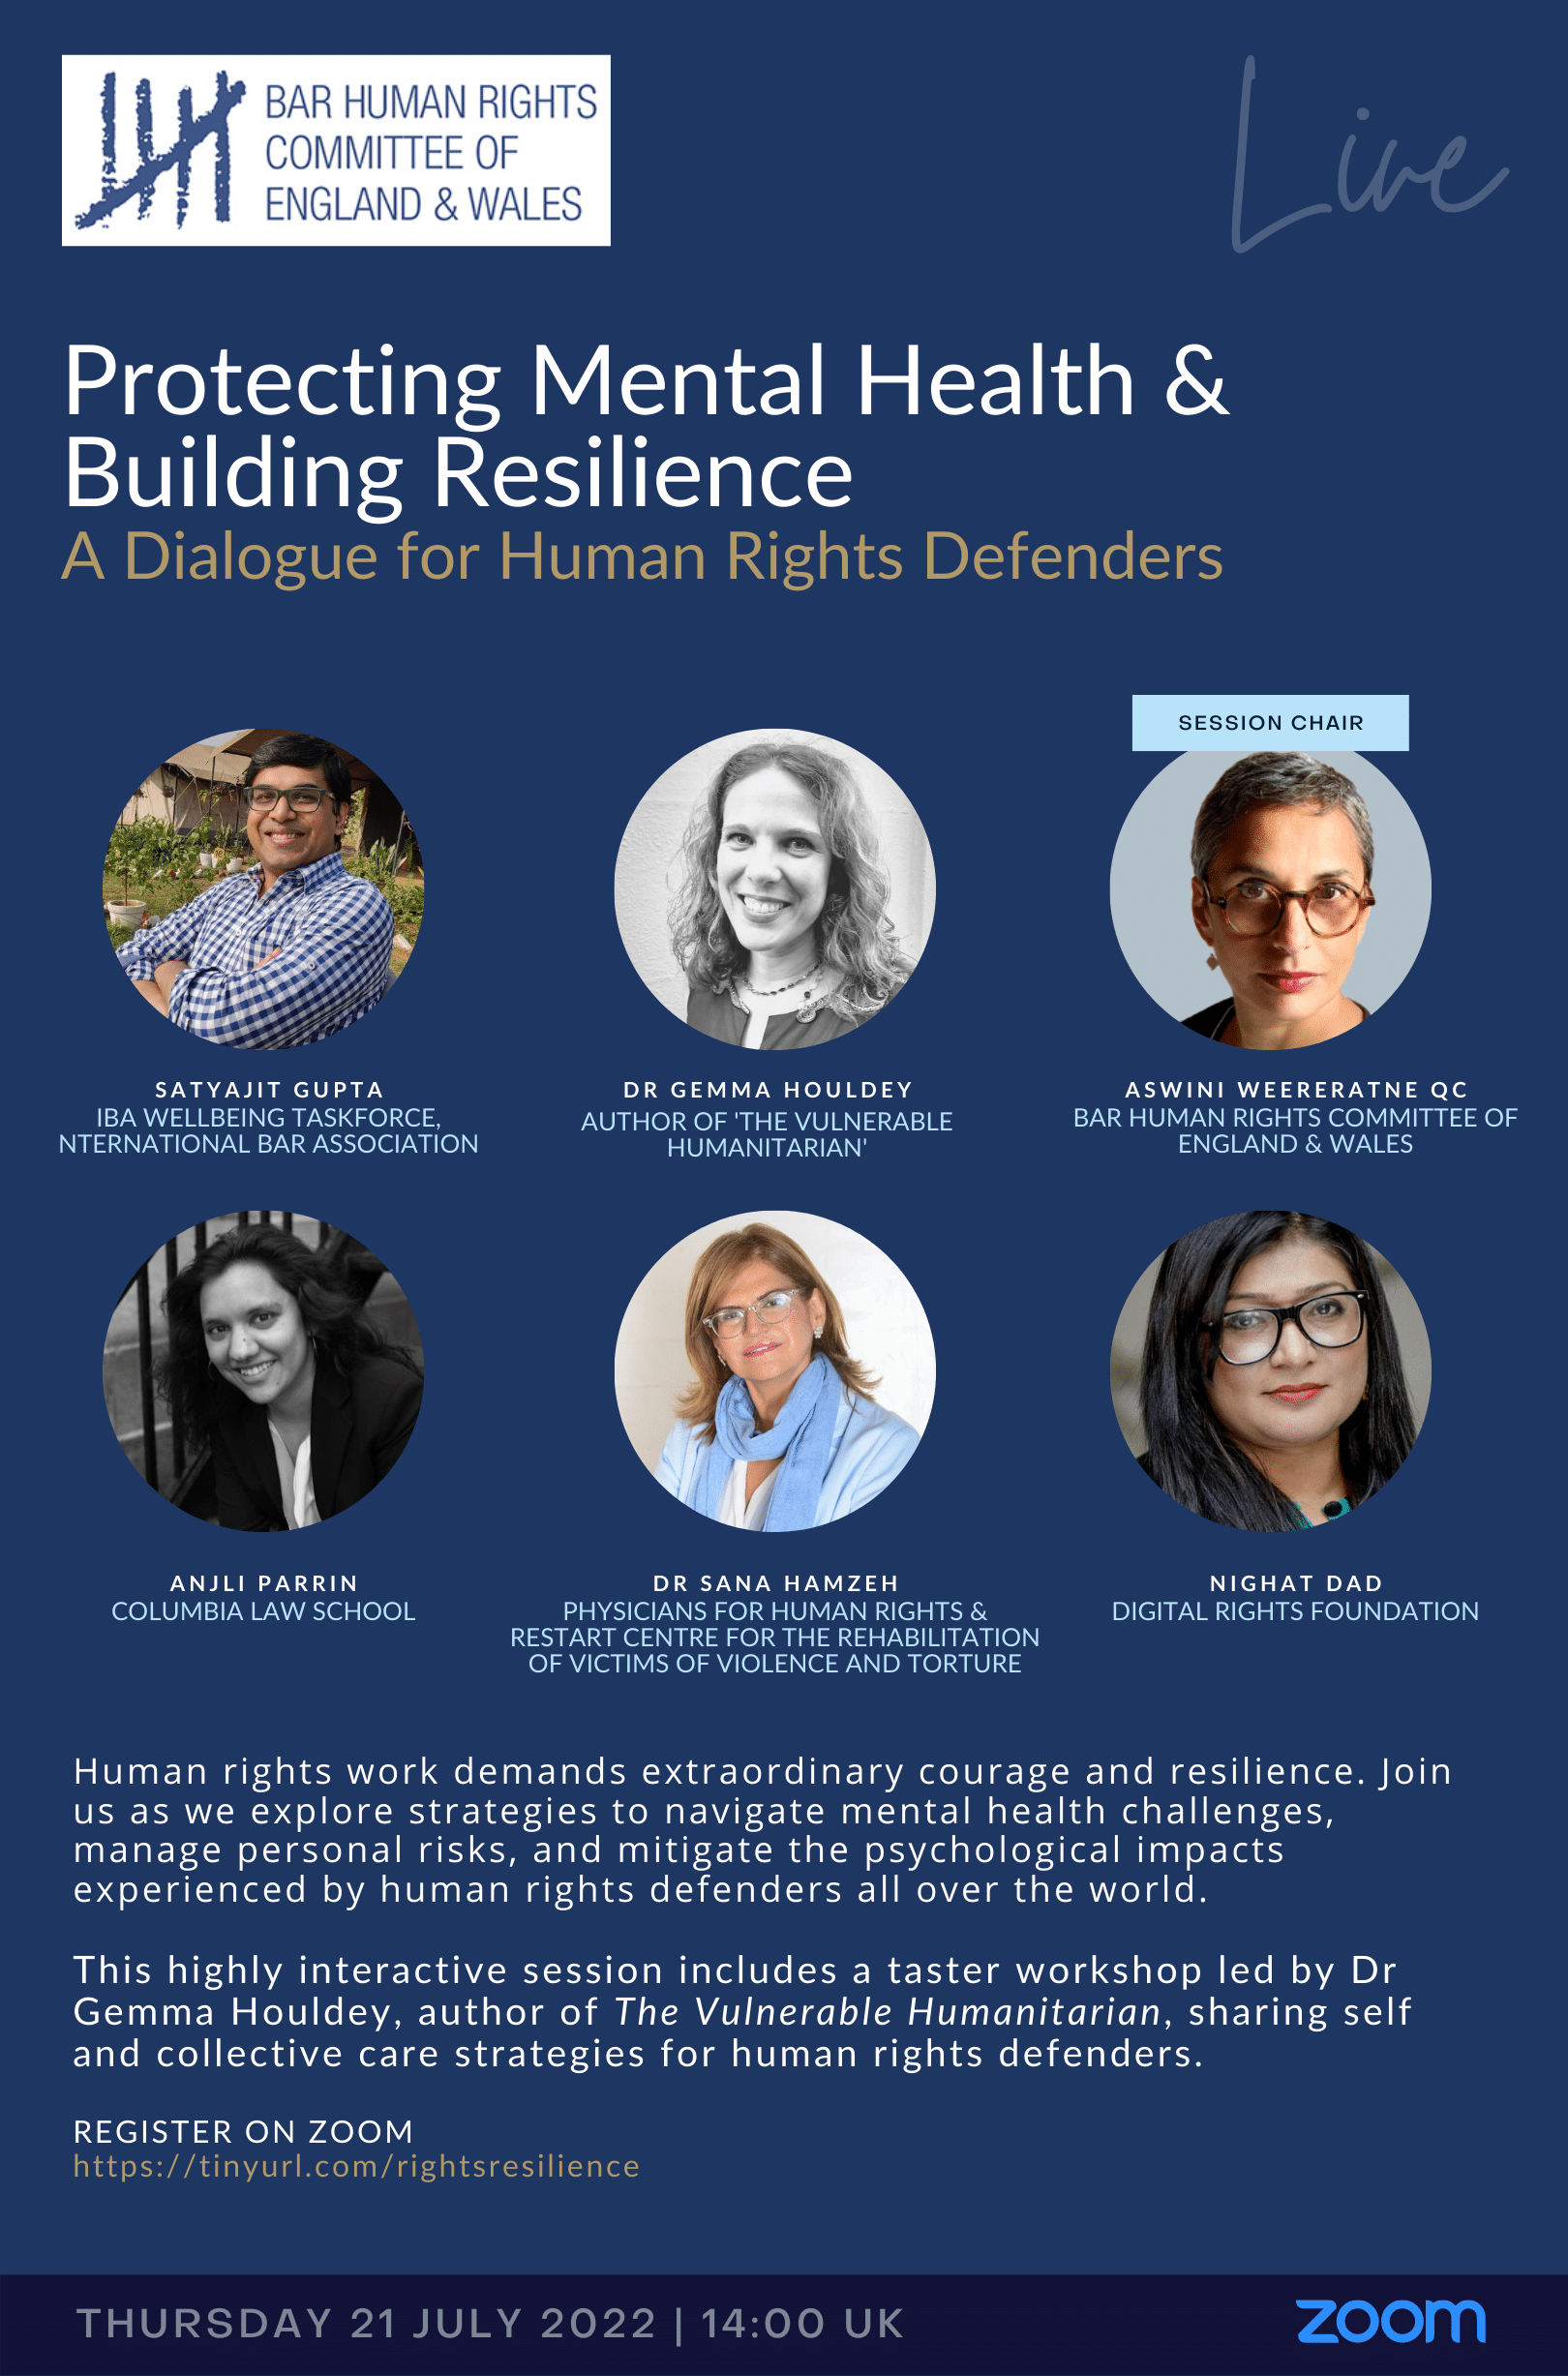 Protecting Mental Health and Building Resilience A Dialogue for Human Rights Defenders